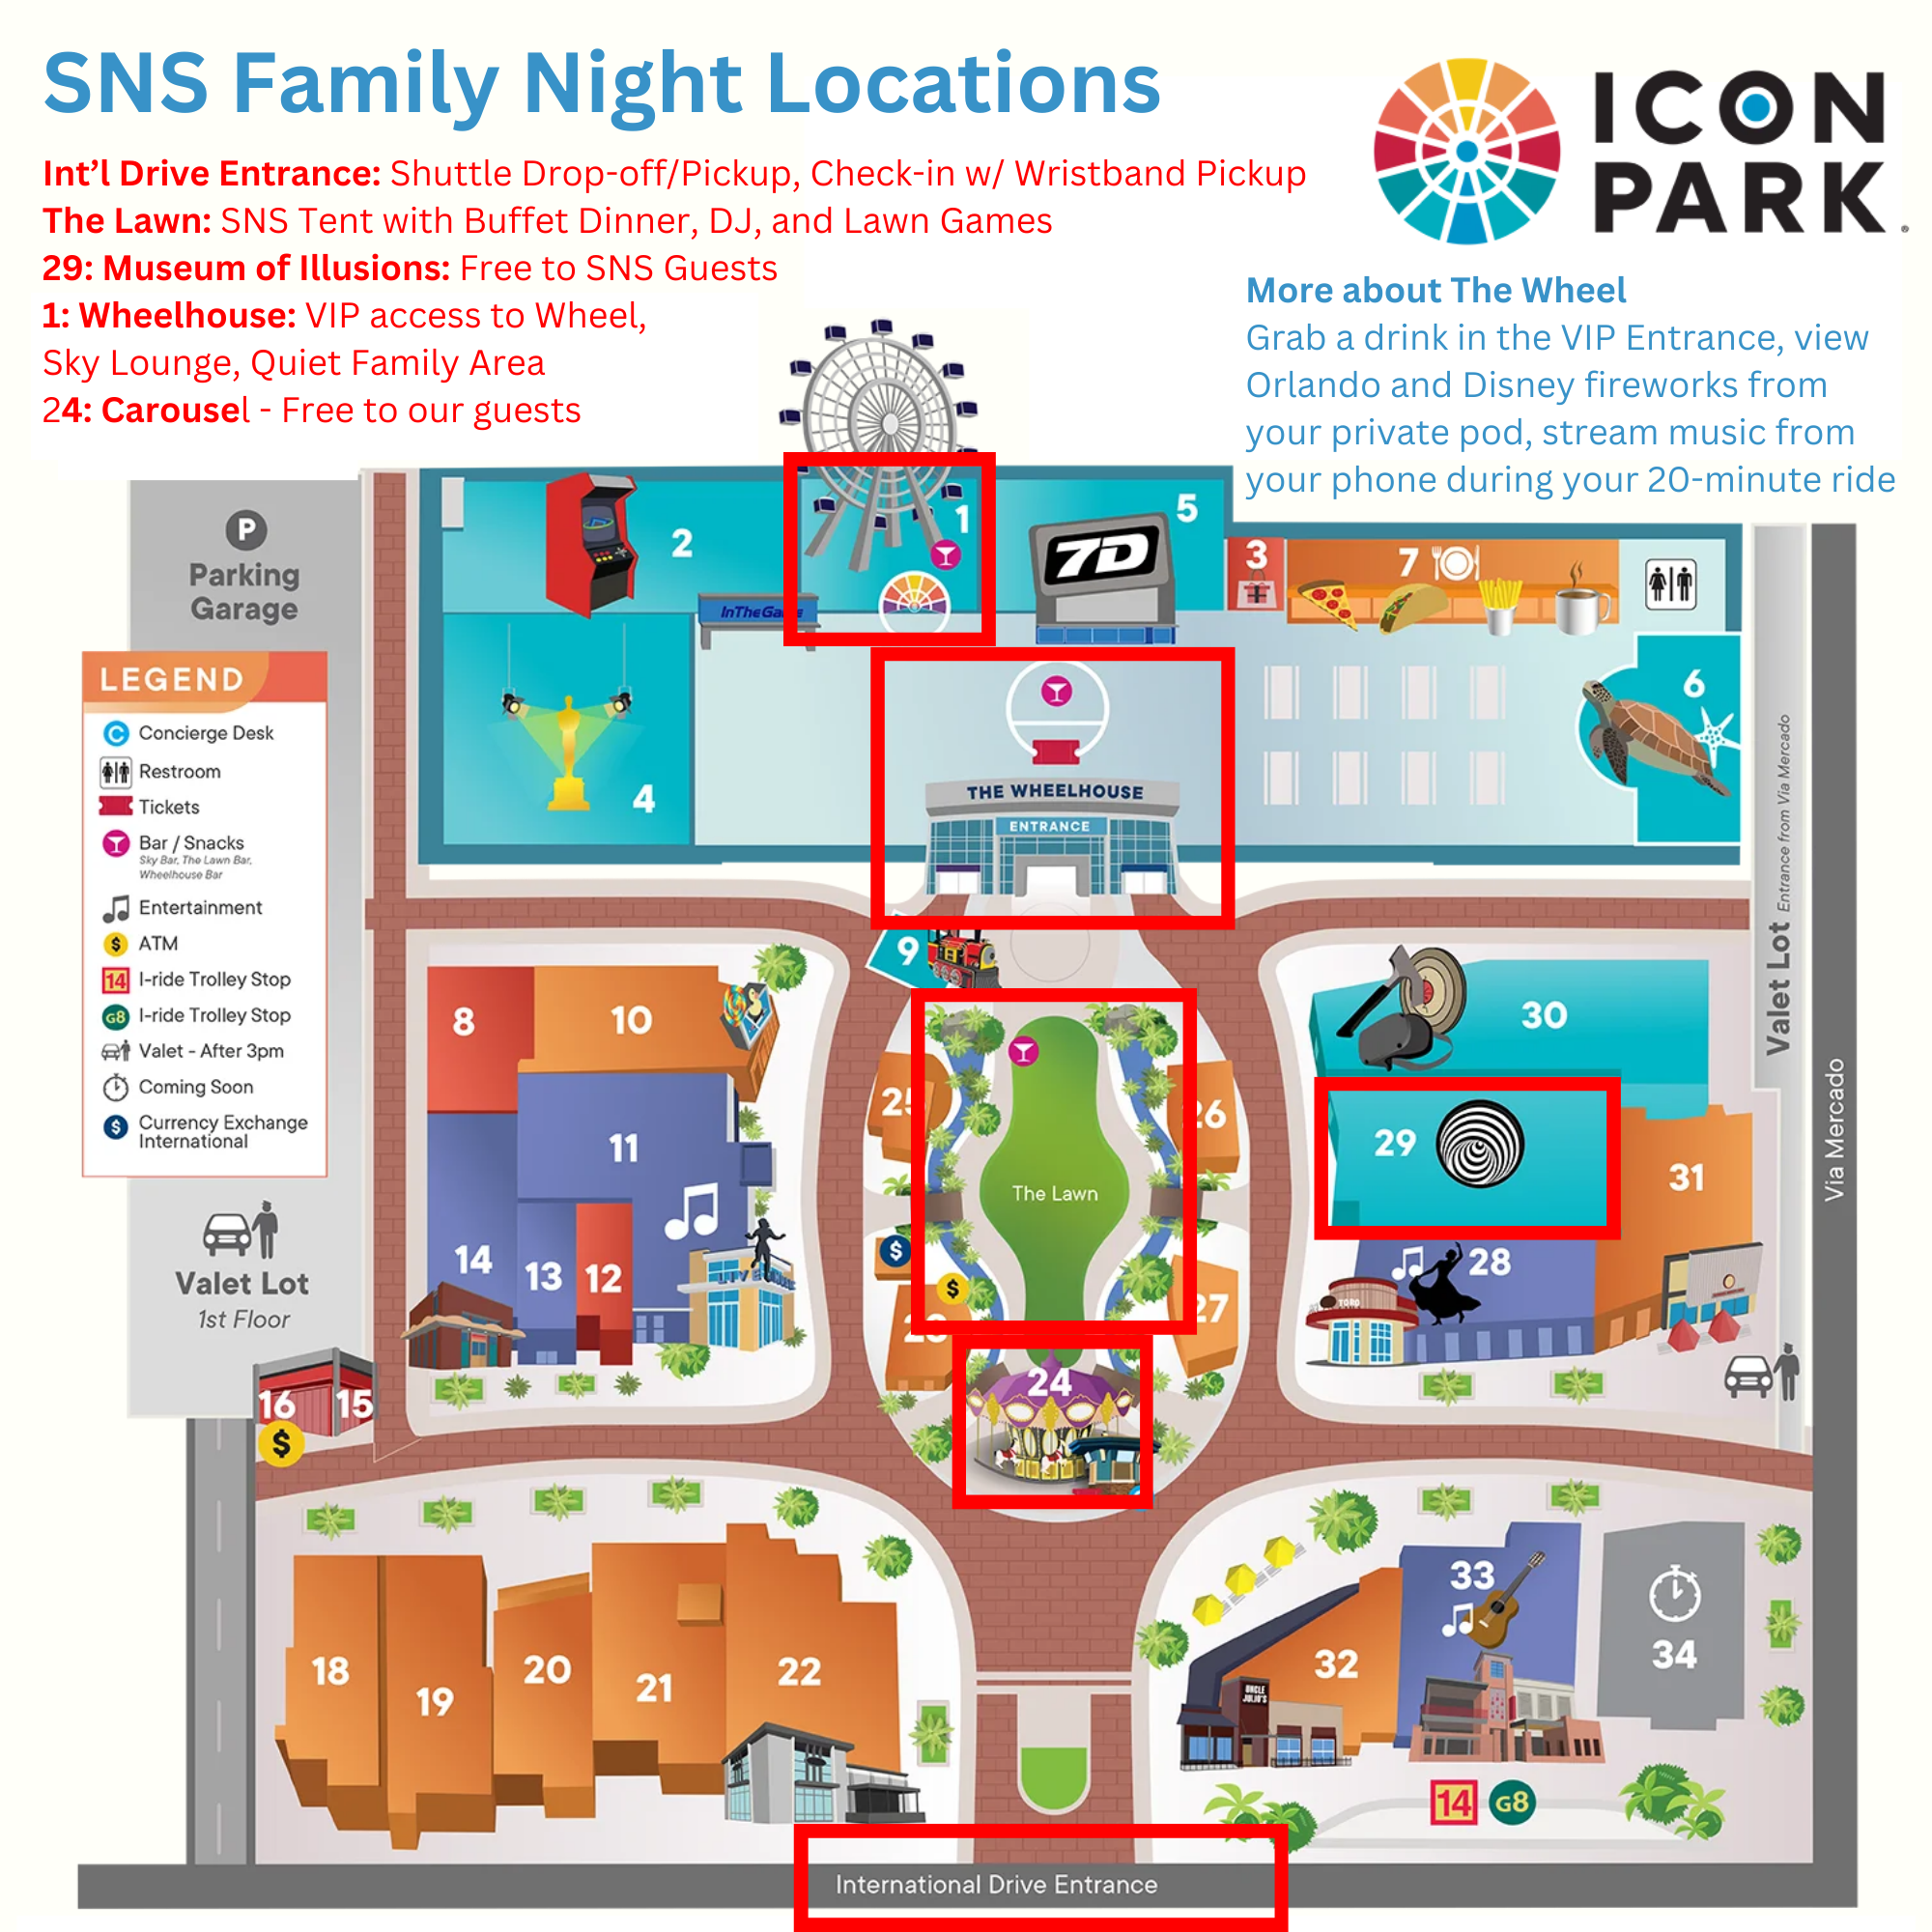 ICON Park Map for Family Night